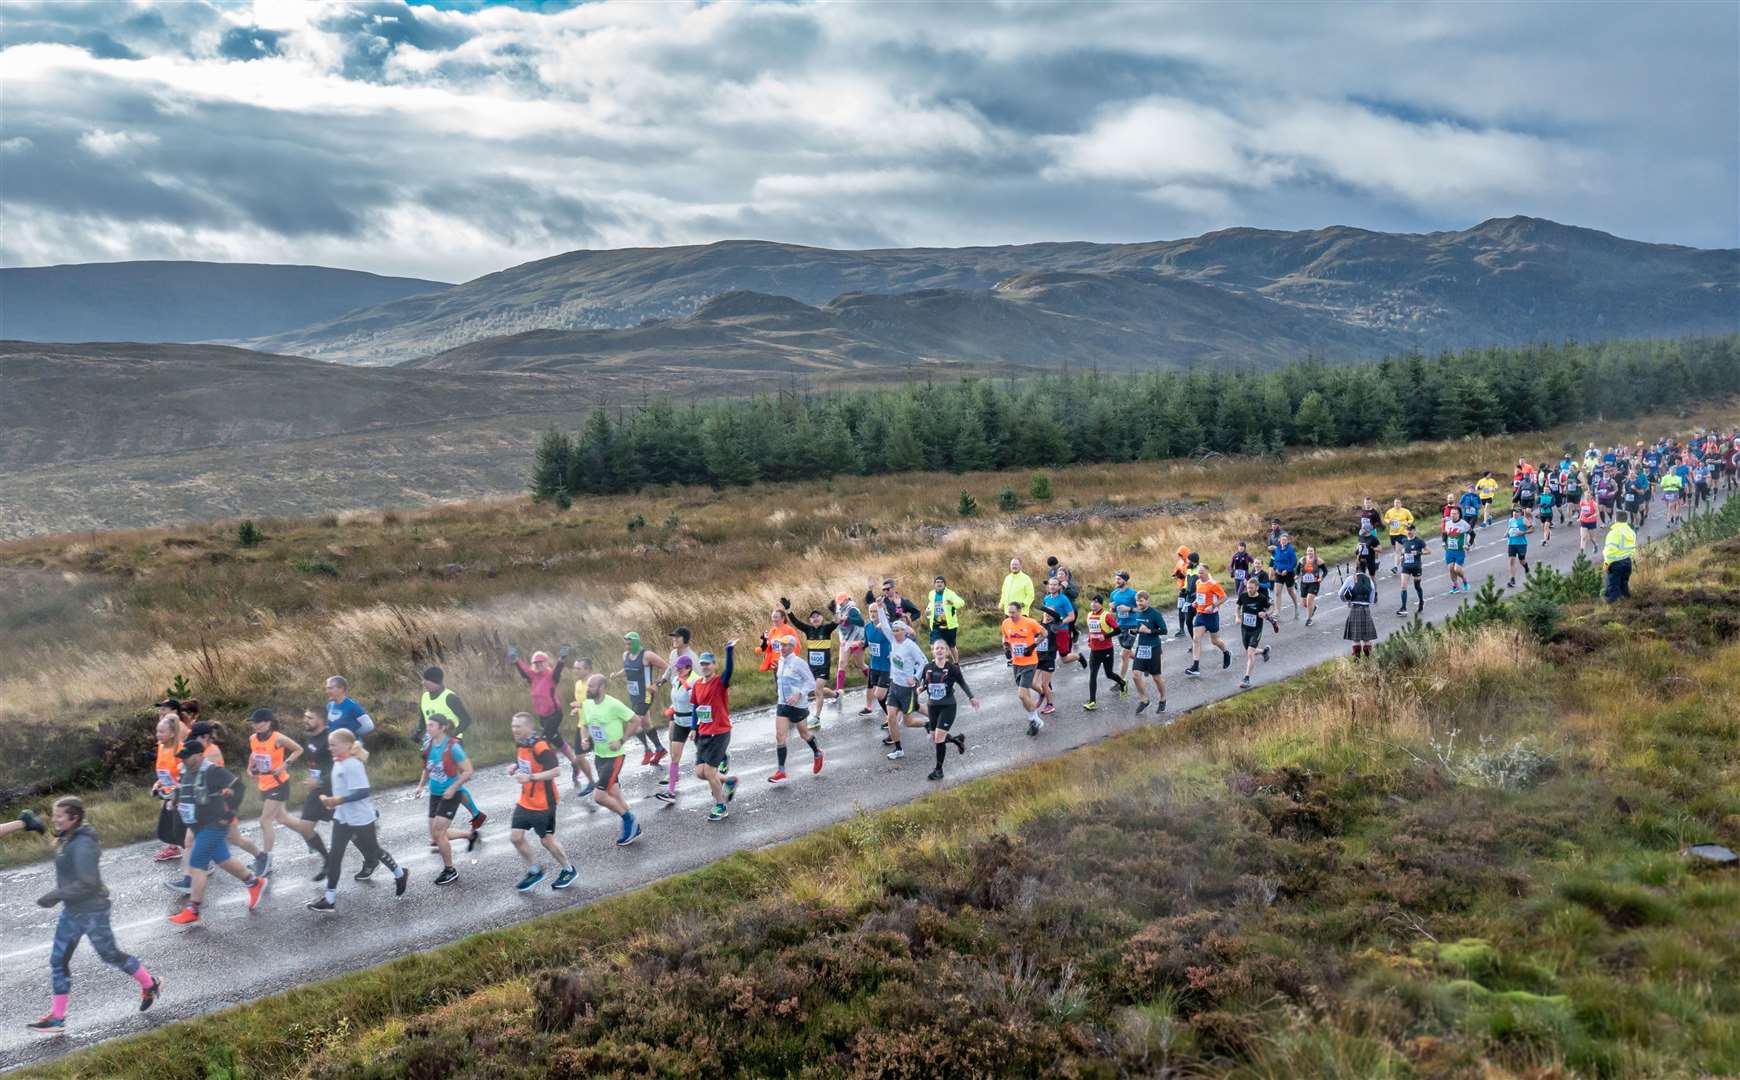 Entries for the Baxters Loch Ness Marathon and Festival of Running are open until September 26.